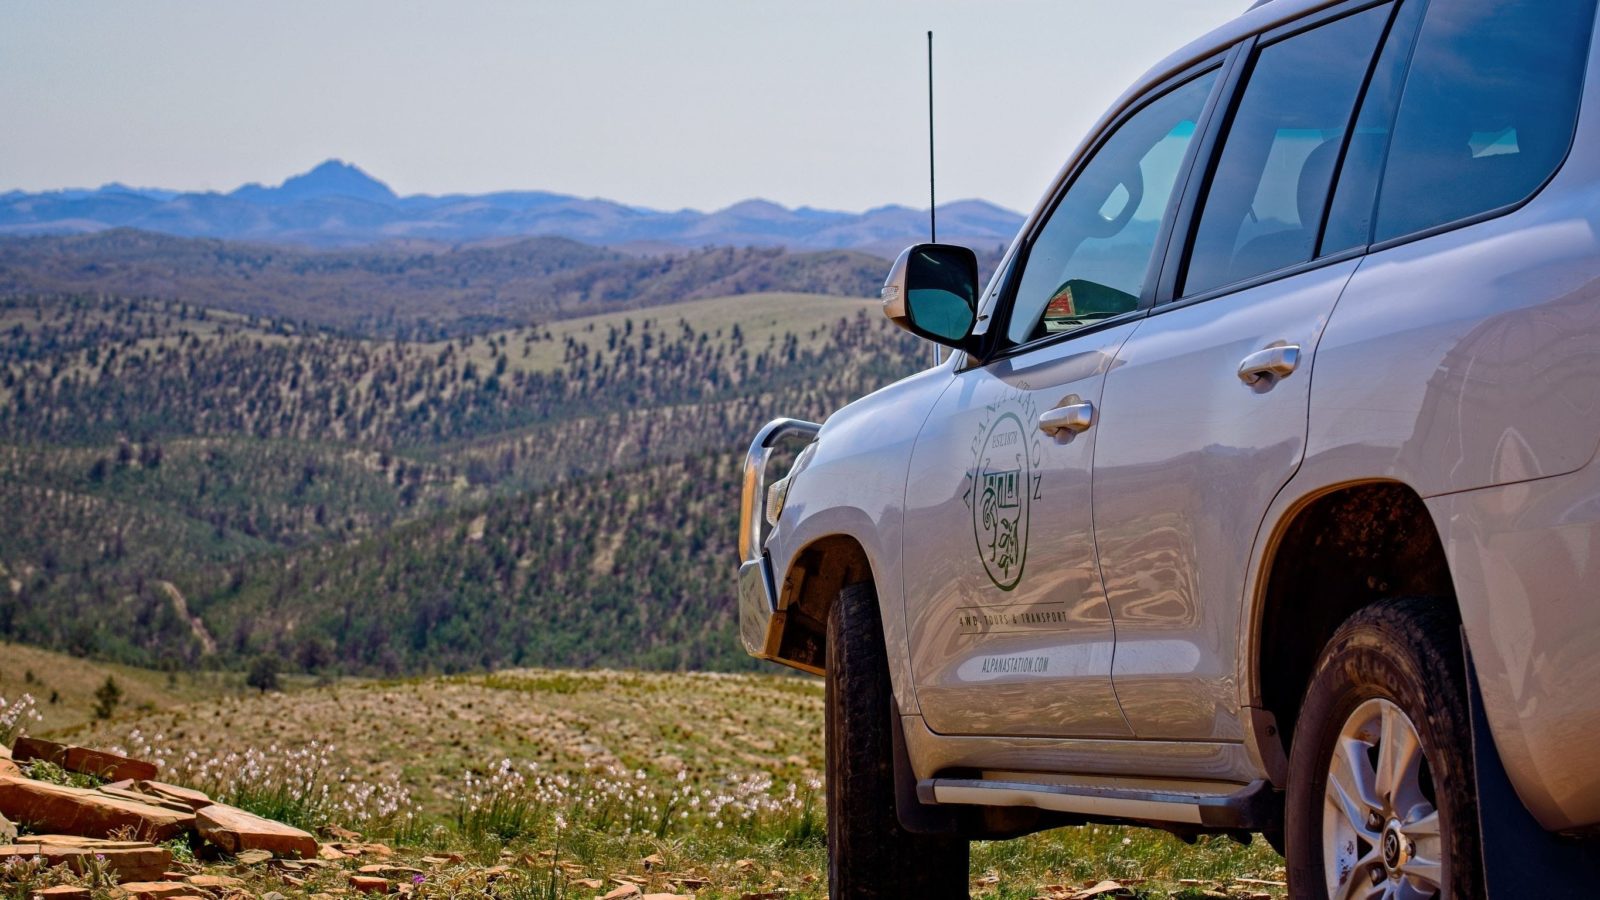 At 700m above sea level Mt Nielsen is one of the highest peaks in the Flinders with 4WD access